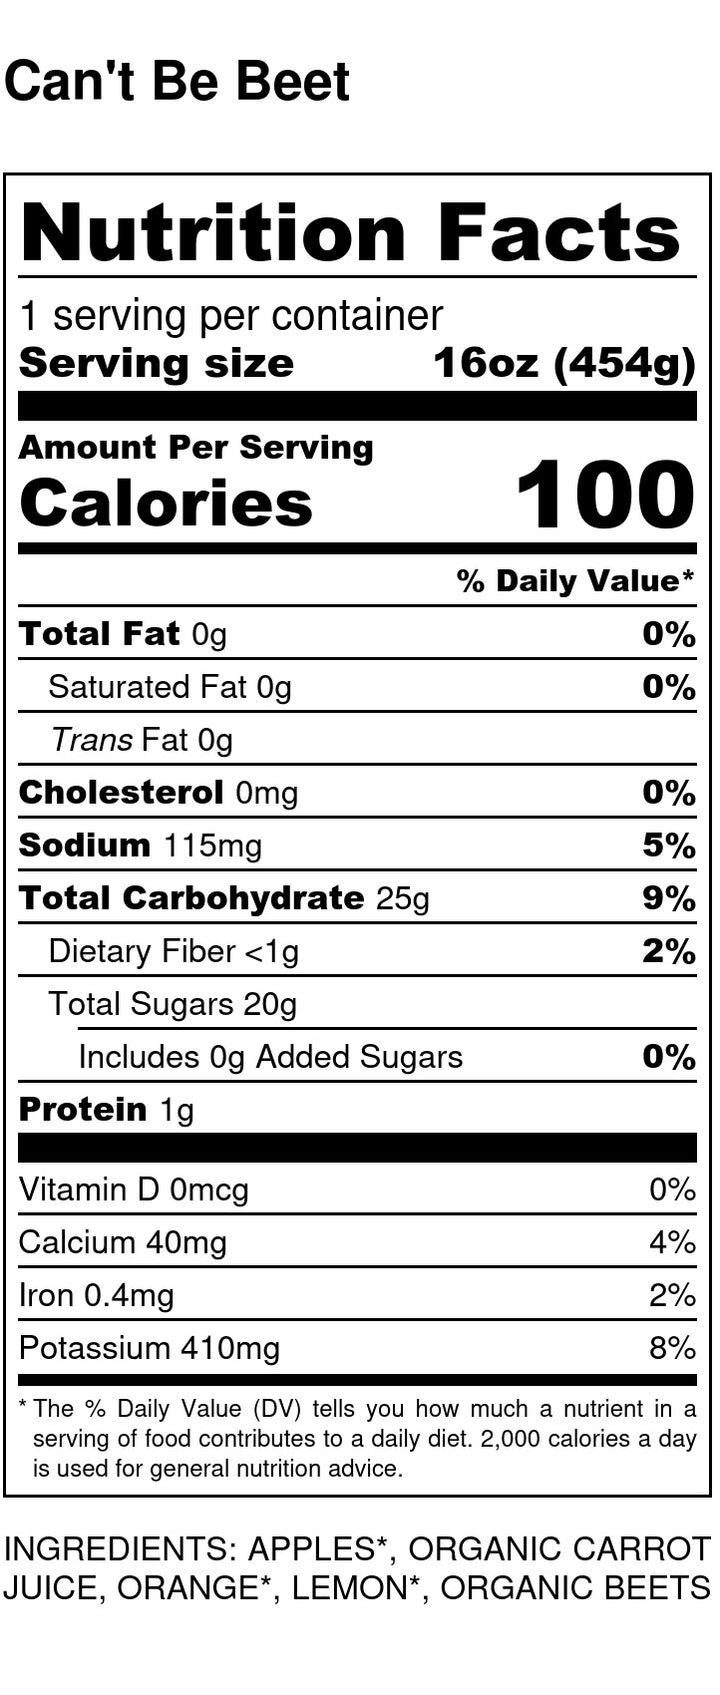 Can't Be Beet Nutrition Label